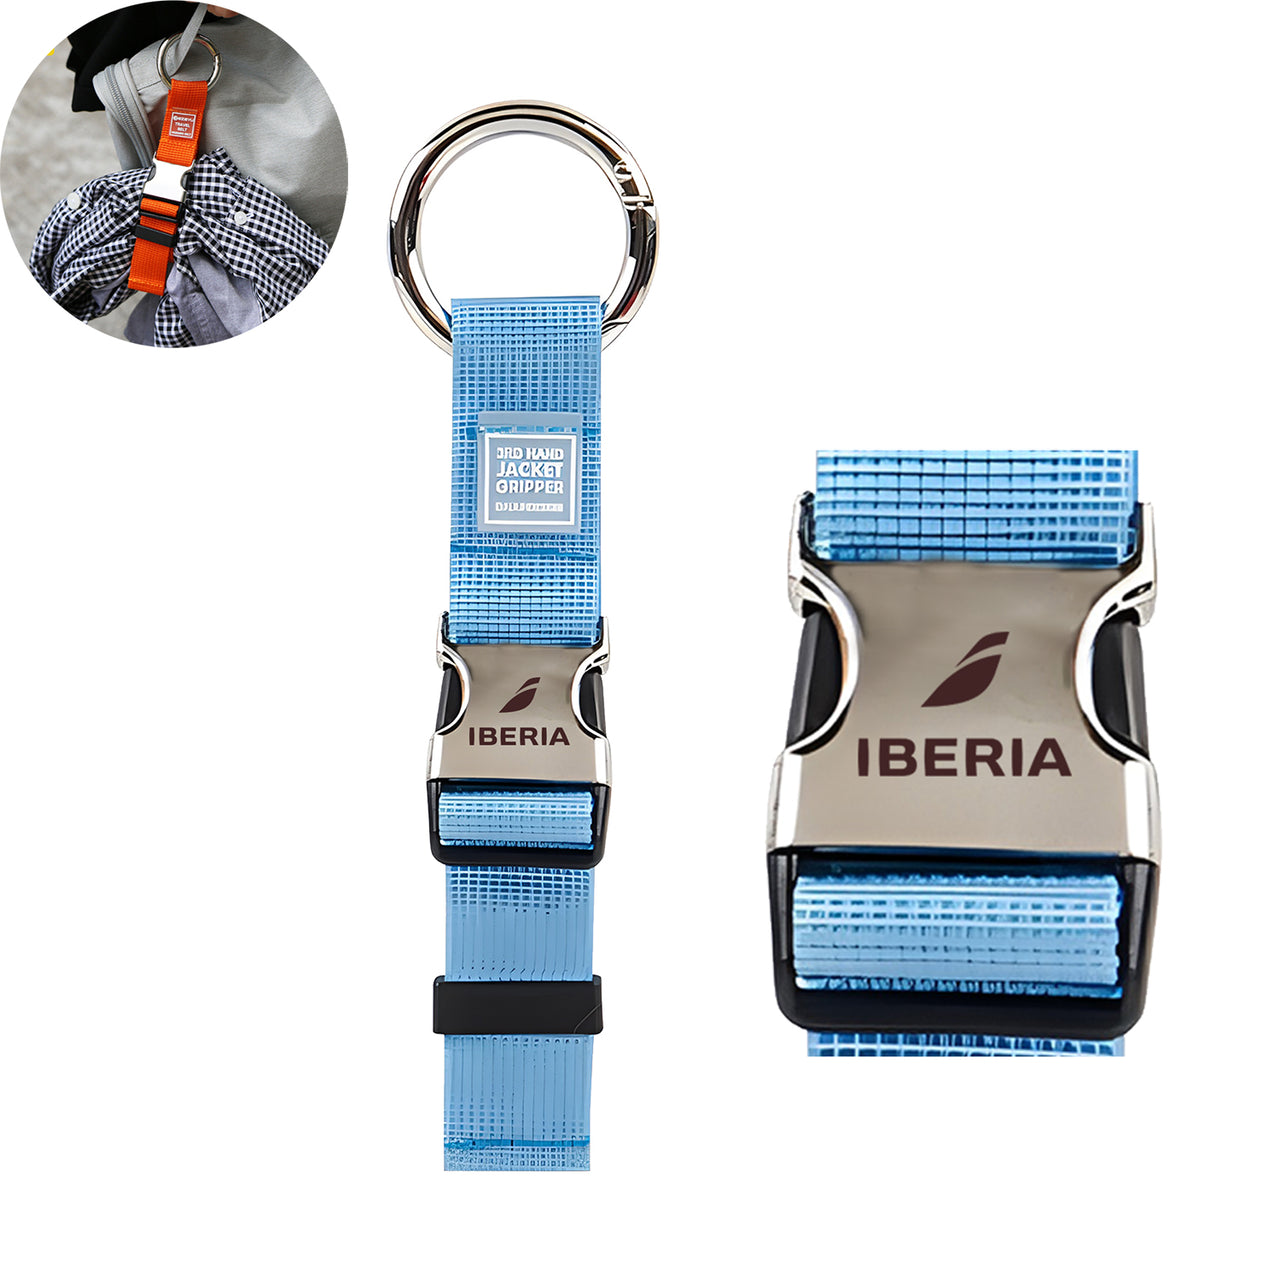 Iberia Airlines Designed Portable Luggage Strap Jacket Gripper